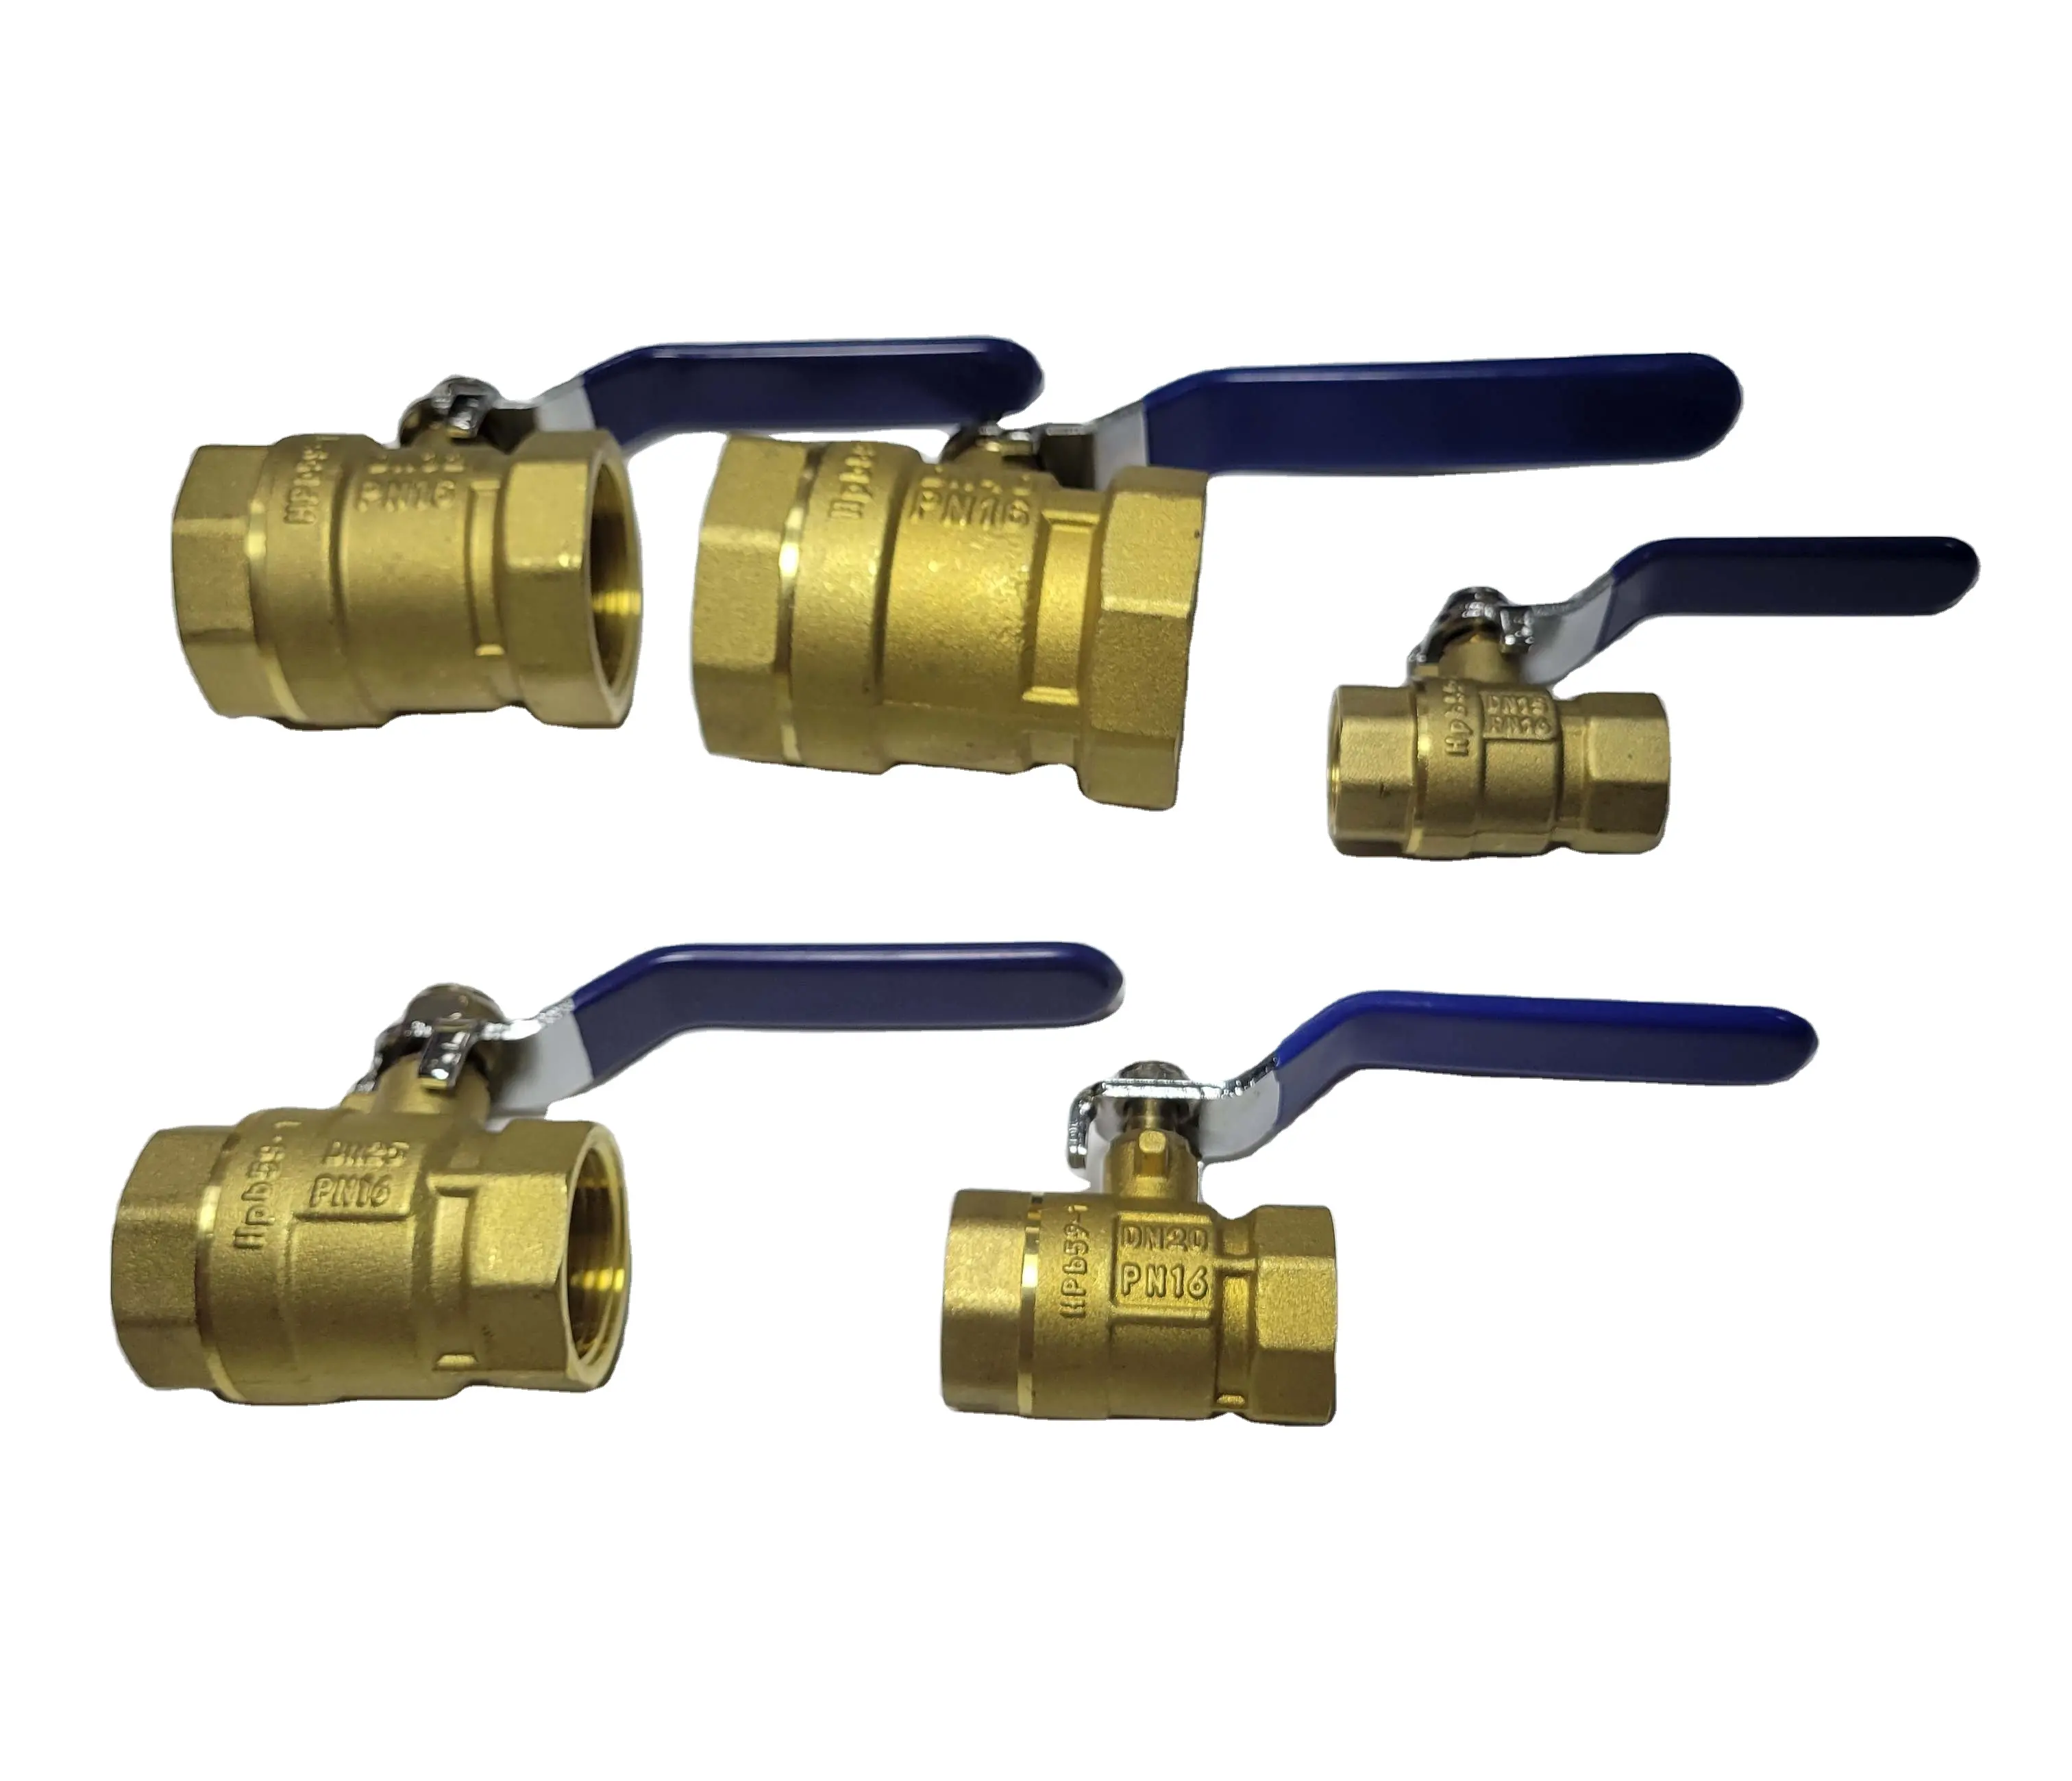 High-Quality Full Port Ball Valve Stainless Steel Duty for Water, Oil, and Gas with Blue Locking Handles (3/4" NPT)